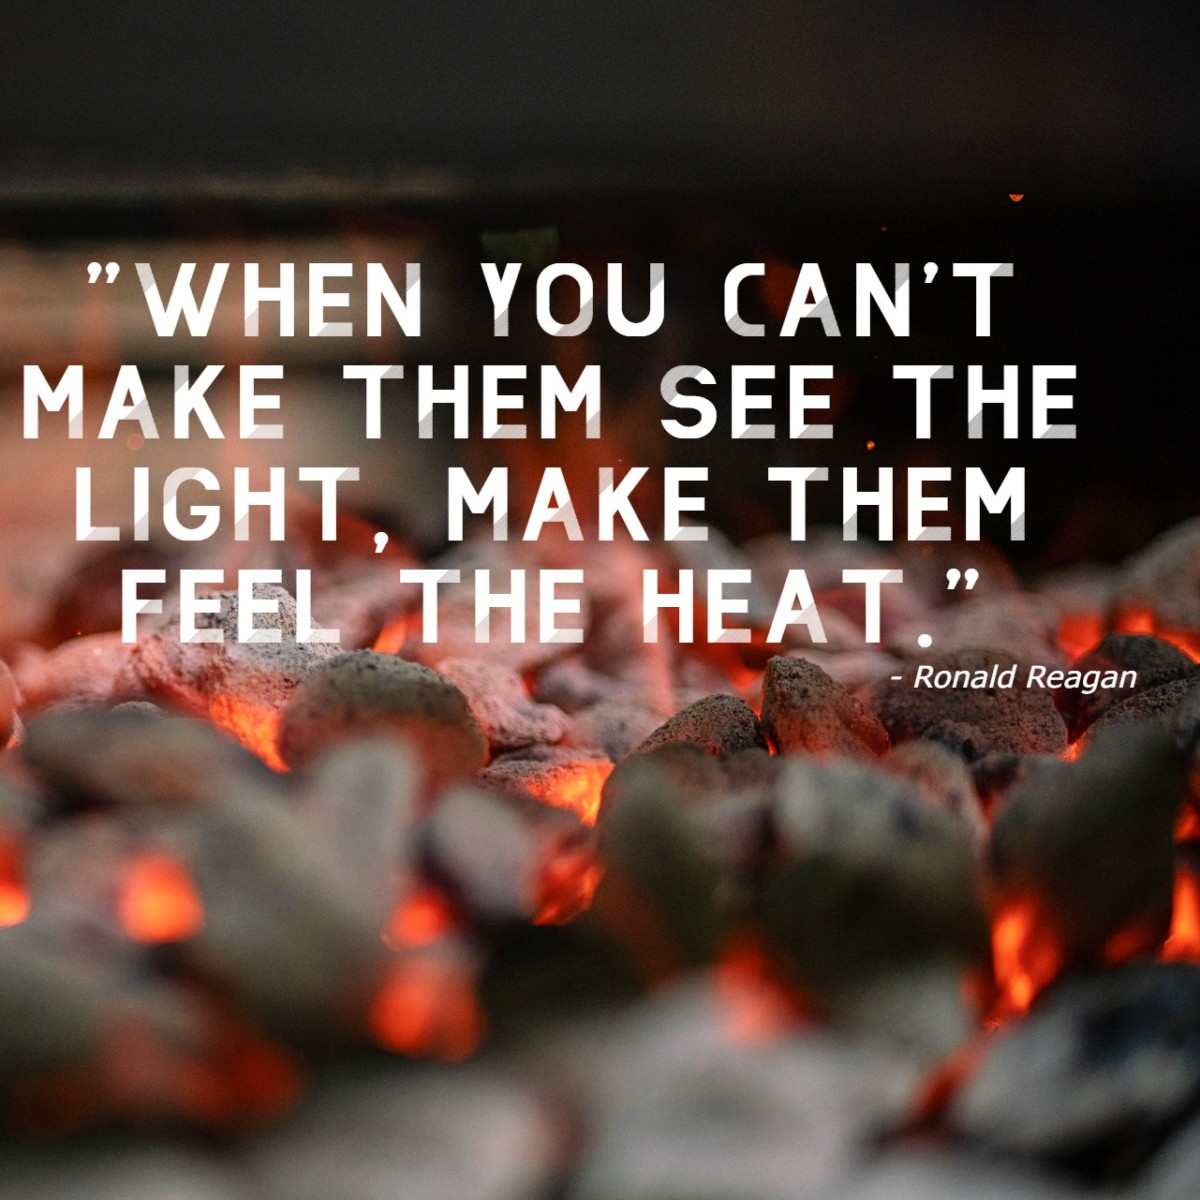 "When you can't make them see the light make them feel the heat." - Ronald Reagan, 40th U.S. President